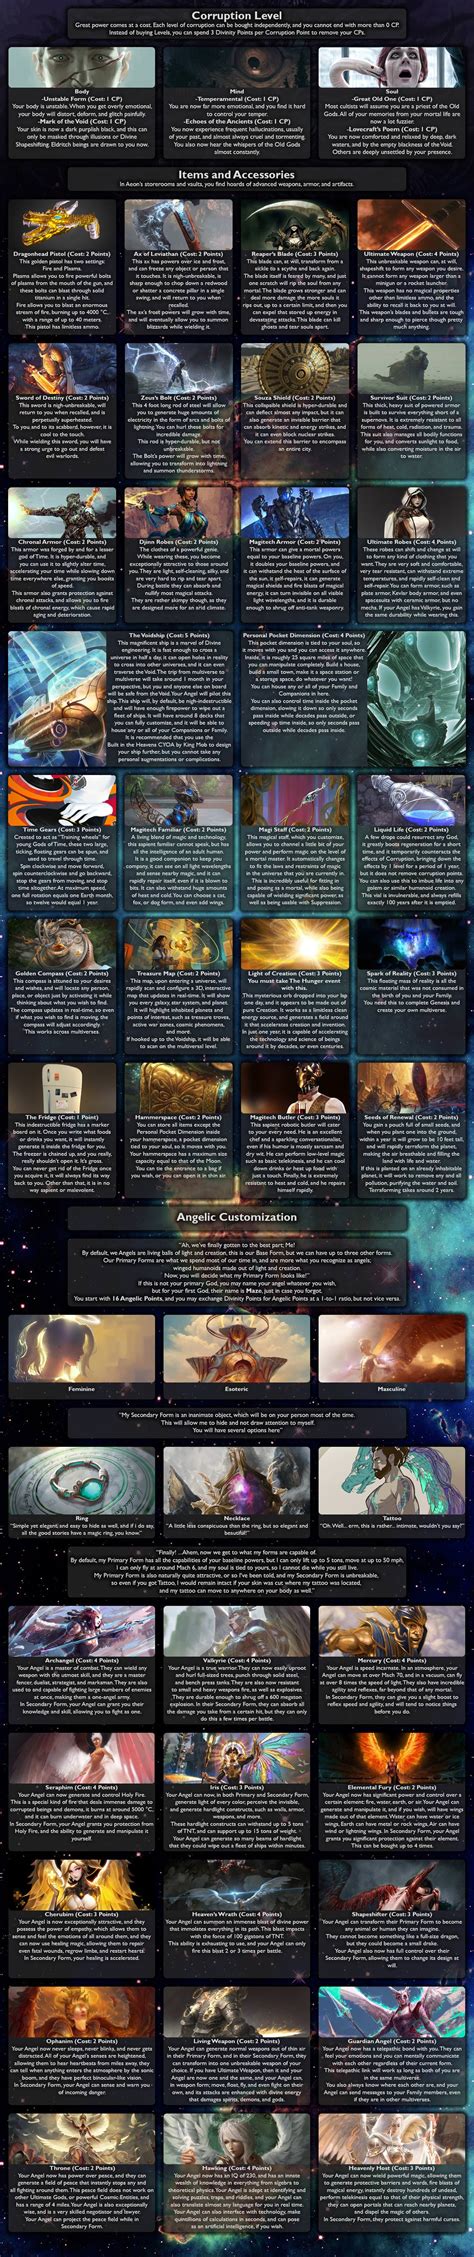 God cyoa. Upgraded Anvil of Transcendent Design (built and fused right into the hangars of the Starship hull itself, upgrades Shipyard) -100S, for balance reasons. -130R. Charge Effect: 50P, production of Ascendants at lower power levels. Charge Effect: 80P, production of Ascendants at equal power levels. 